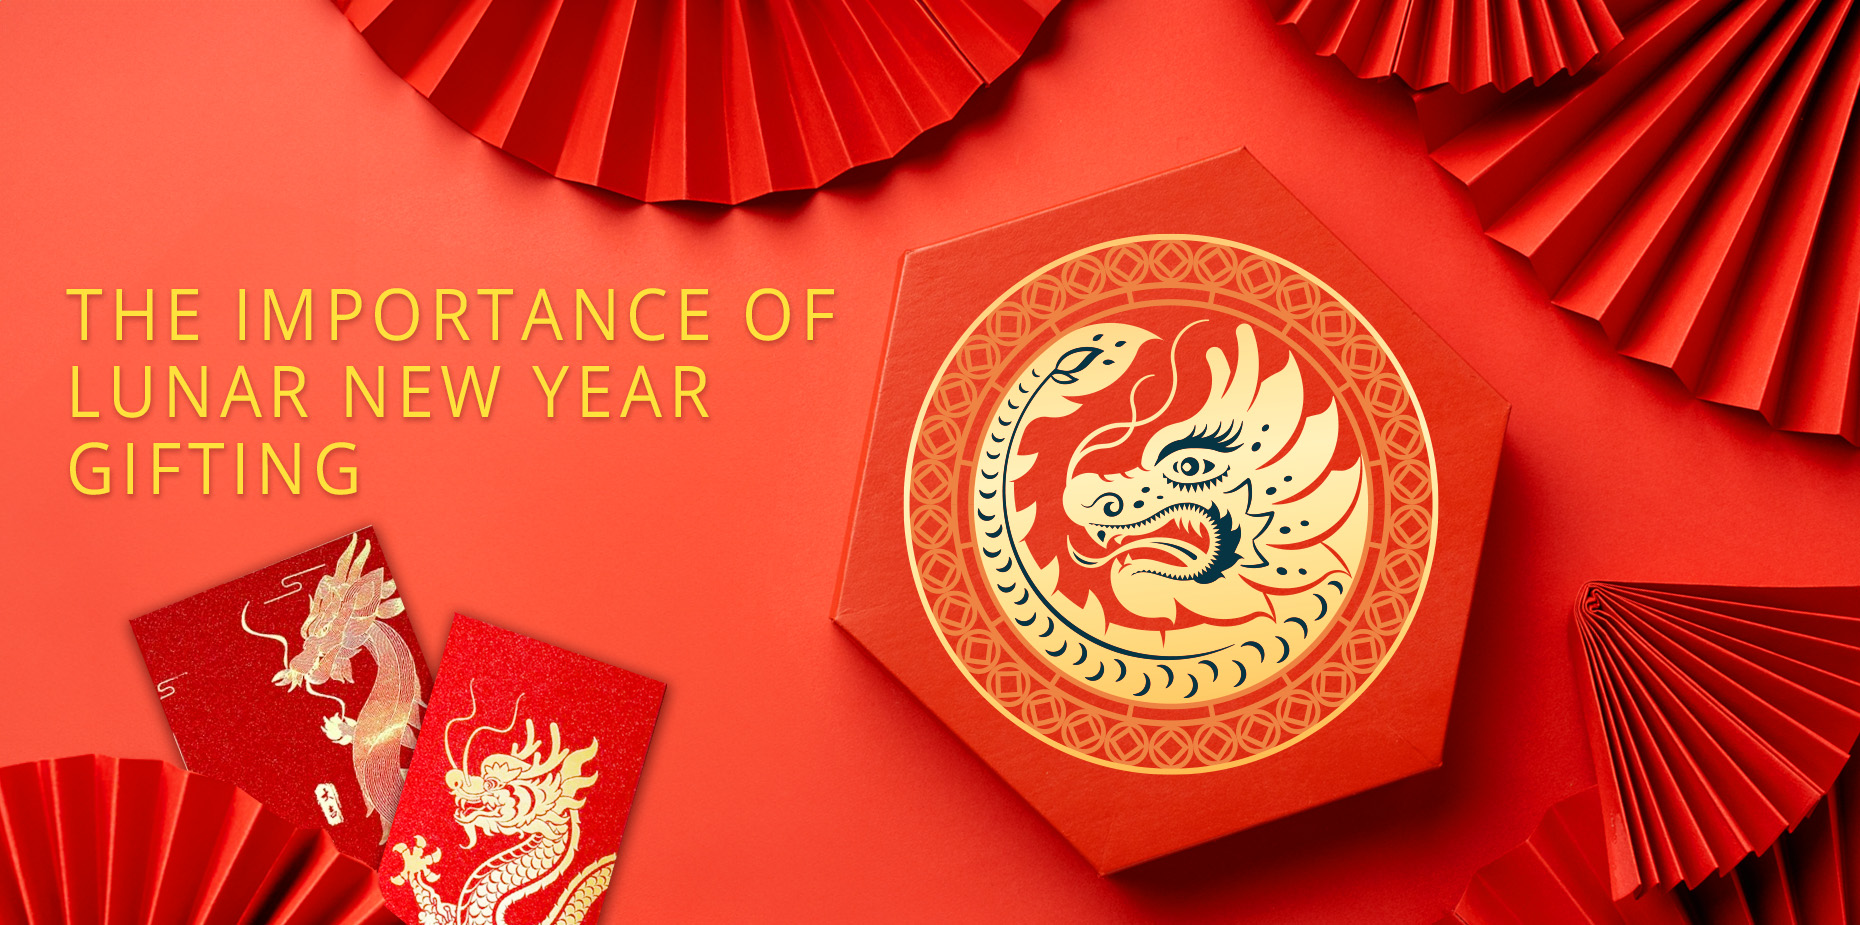 The Importance of Lunar New Year Gifting